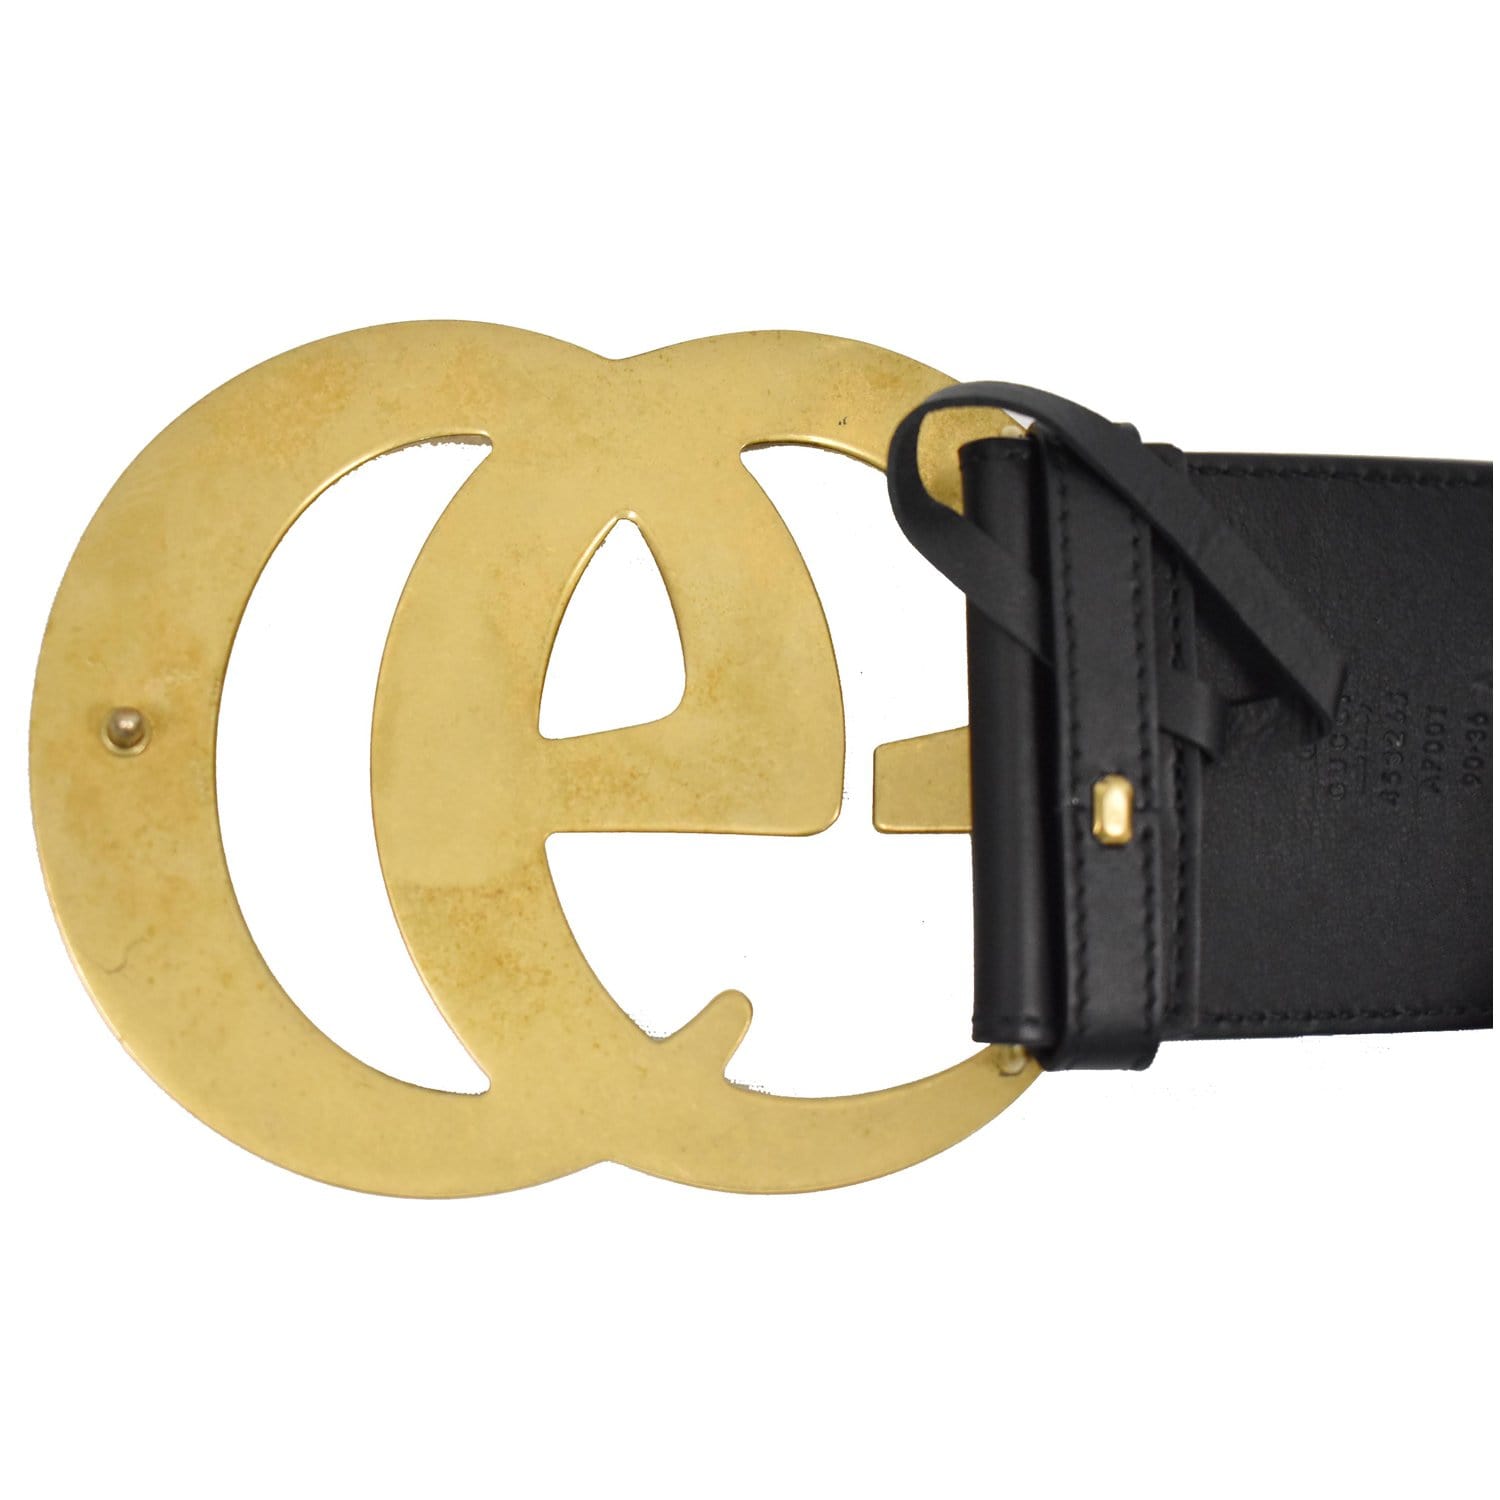 Gucci, Accessories, Gucci Wide Leather Belt Price Is Firm